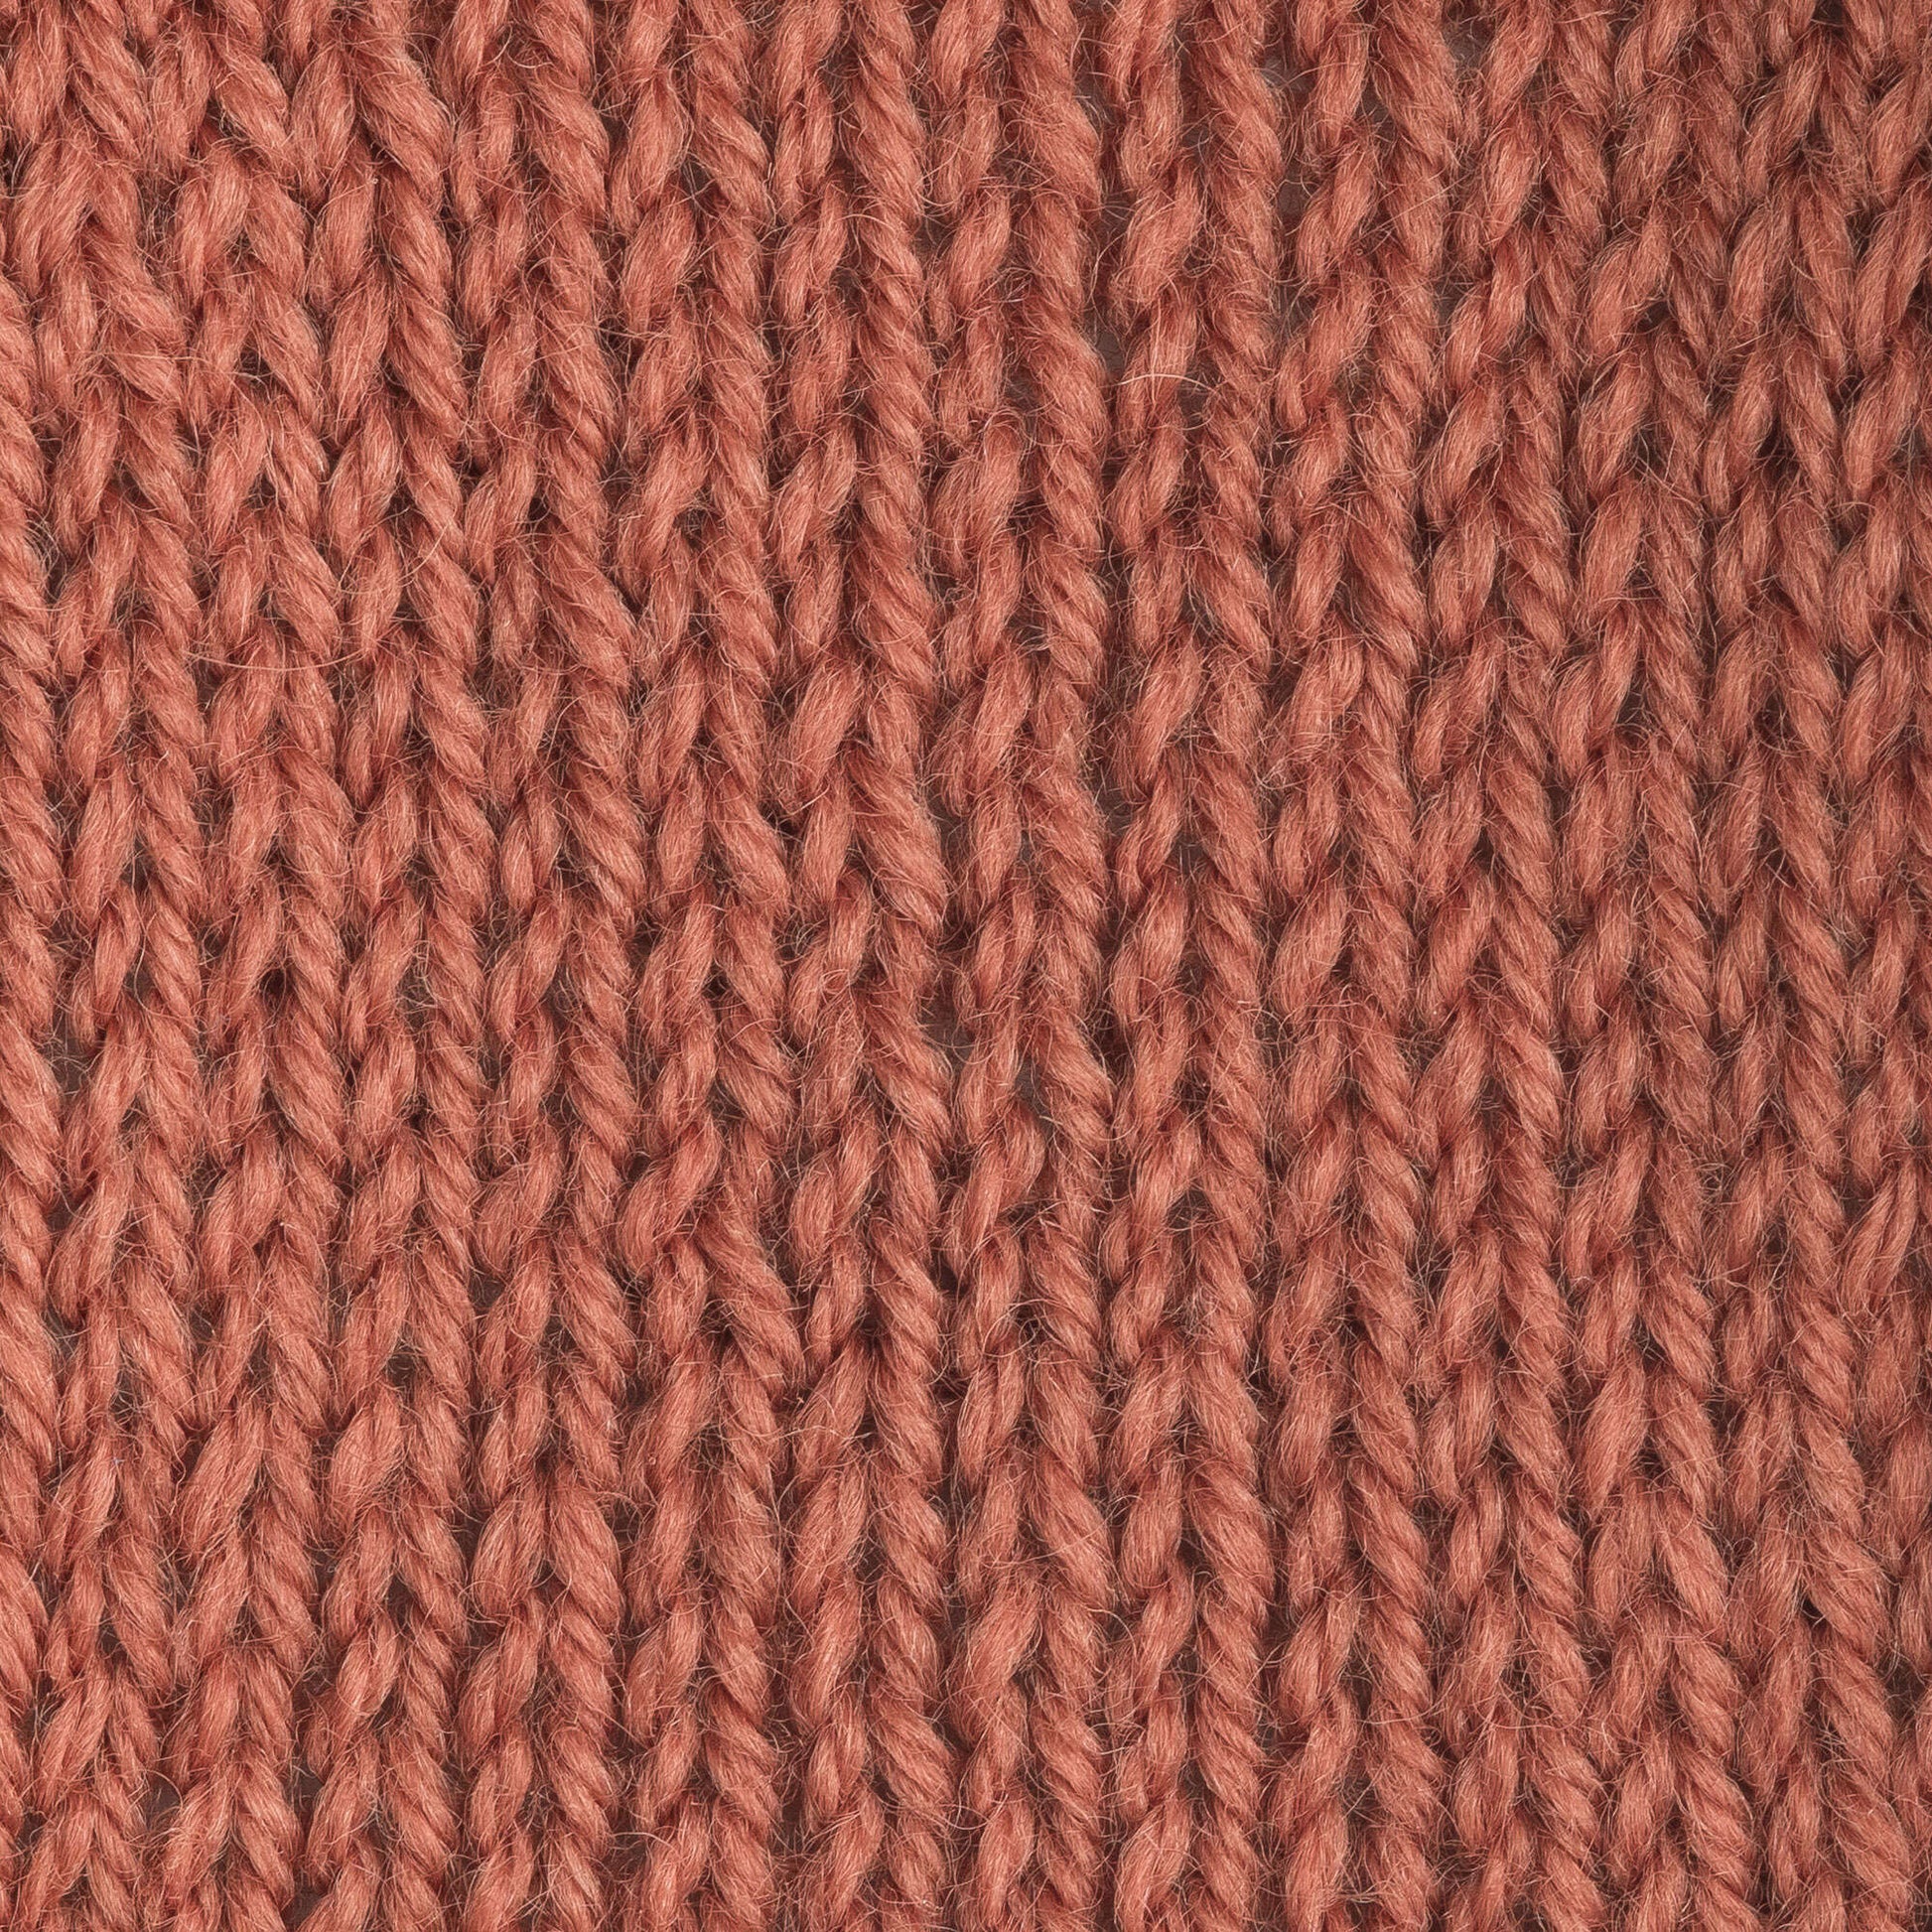 Patons Classic Wool Worsted Yarn - Discontinued Shades Gingerbread